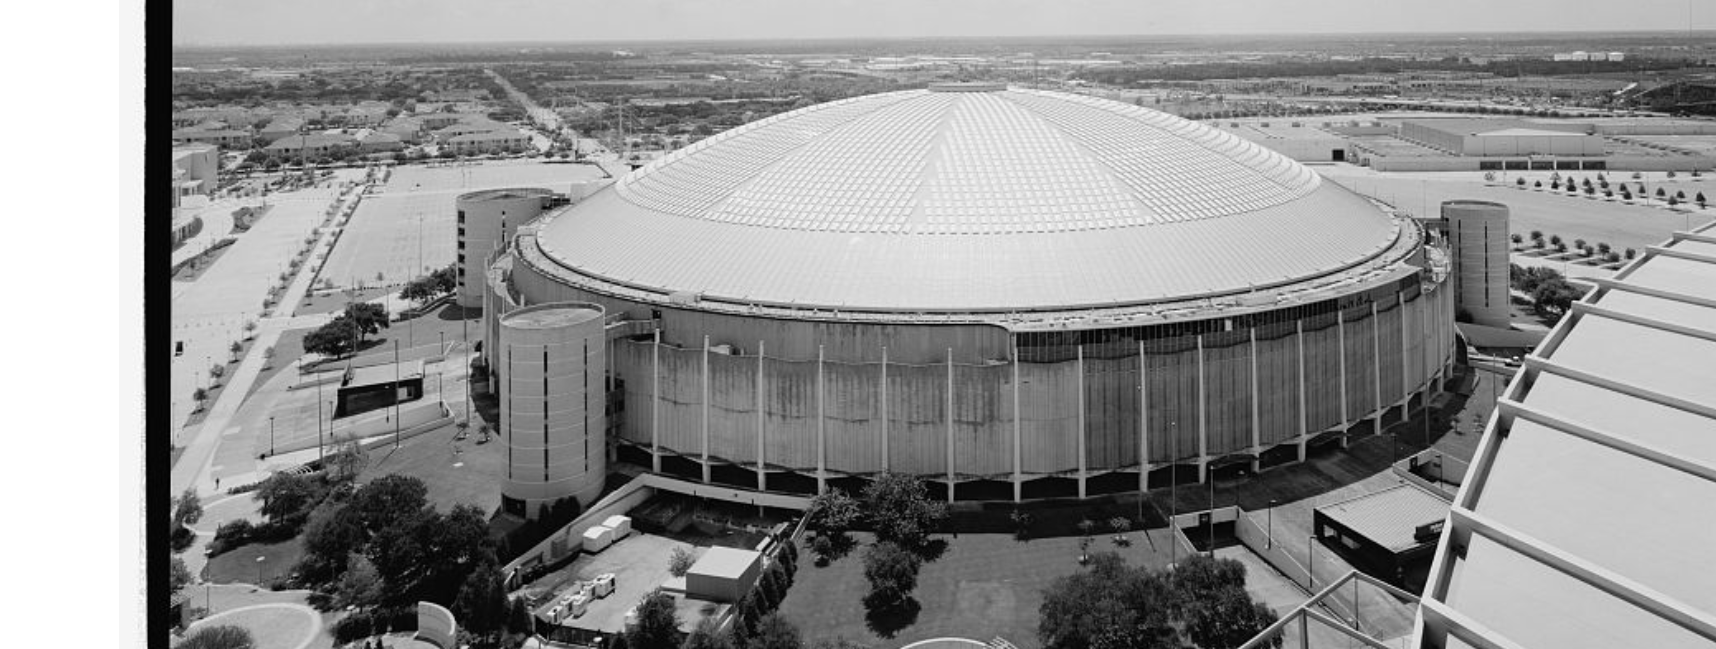 Astrodome looking east from rooftop of adjacent Reliant Stadium